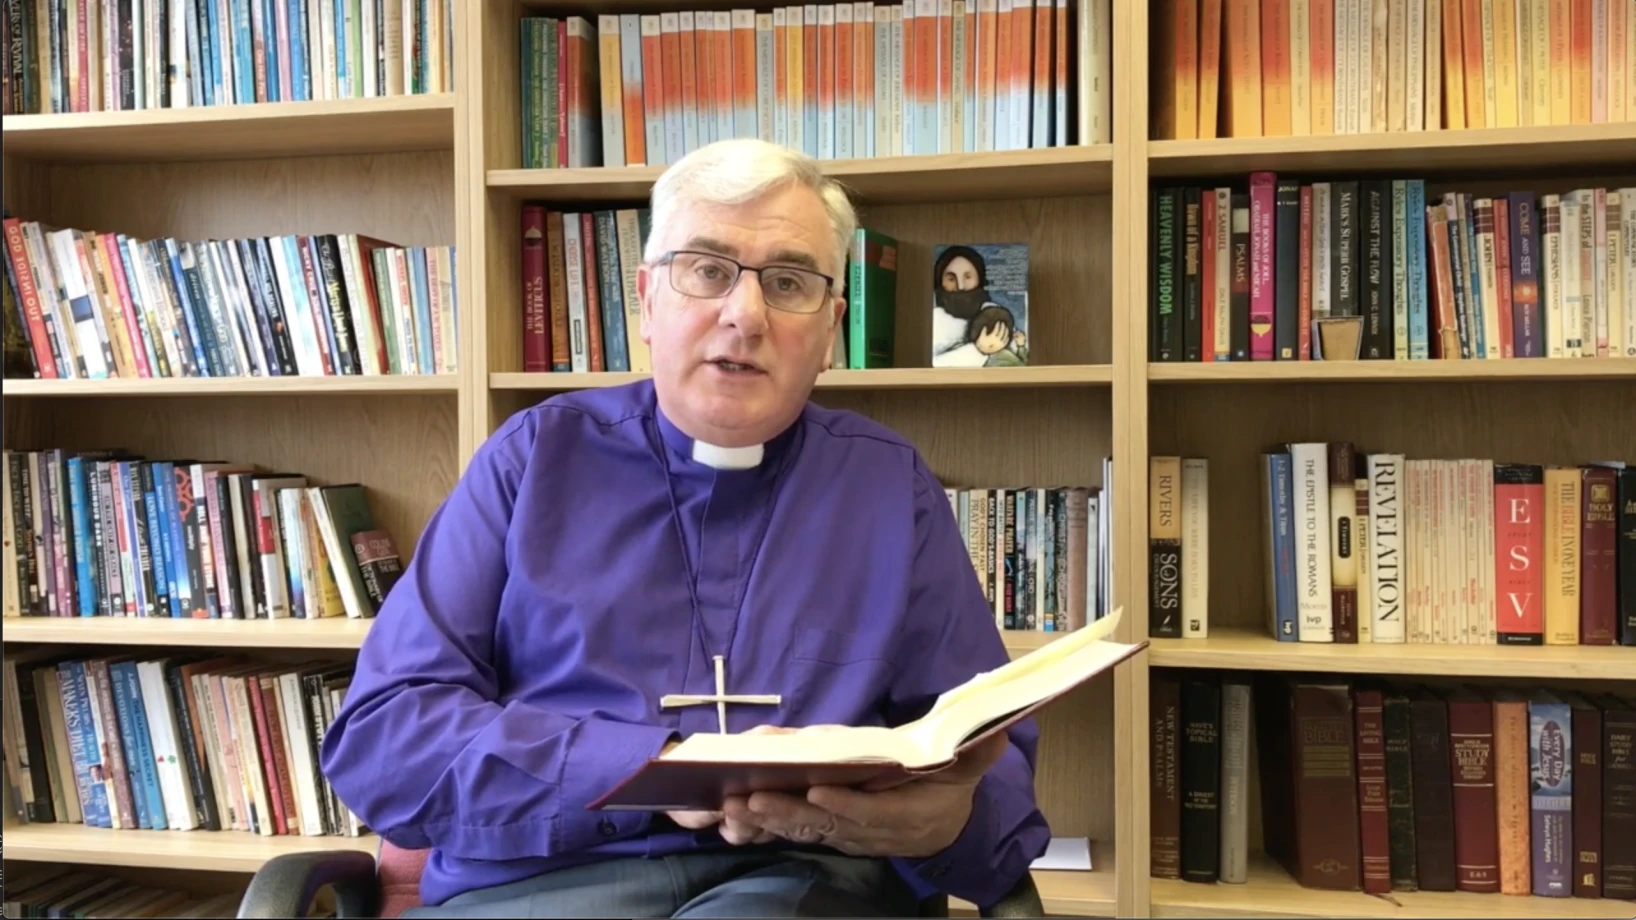 Bishop David’s video message to the diocese